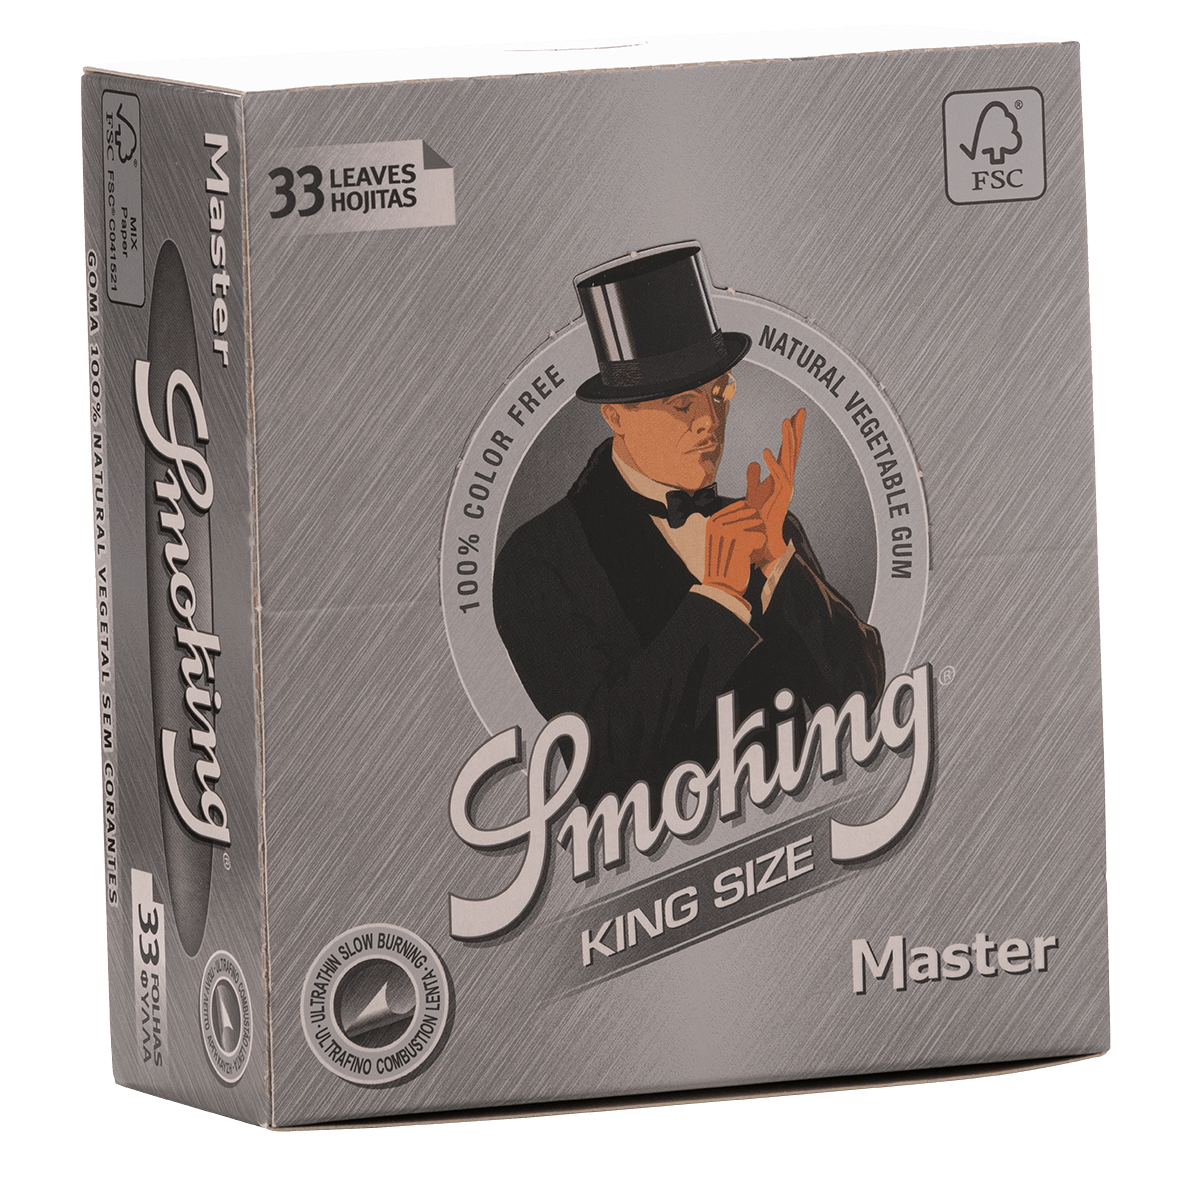 Natural 33 Leaves Papers Each Pack 30x Packs Smoking Master Silver King Size 